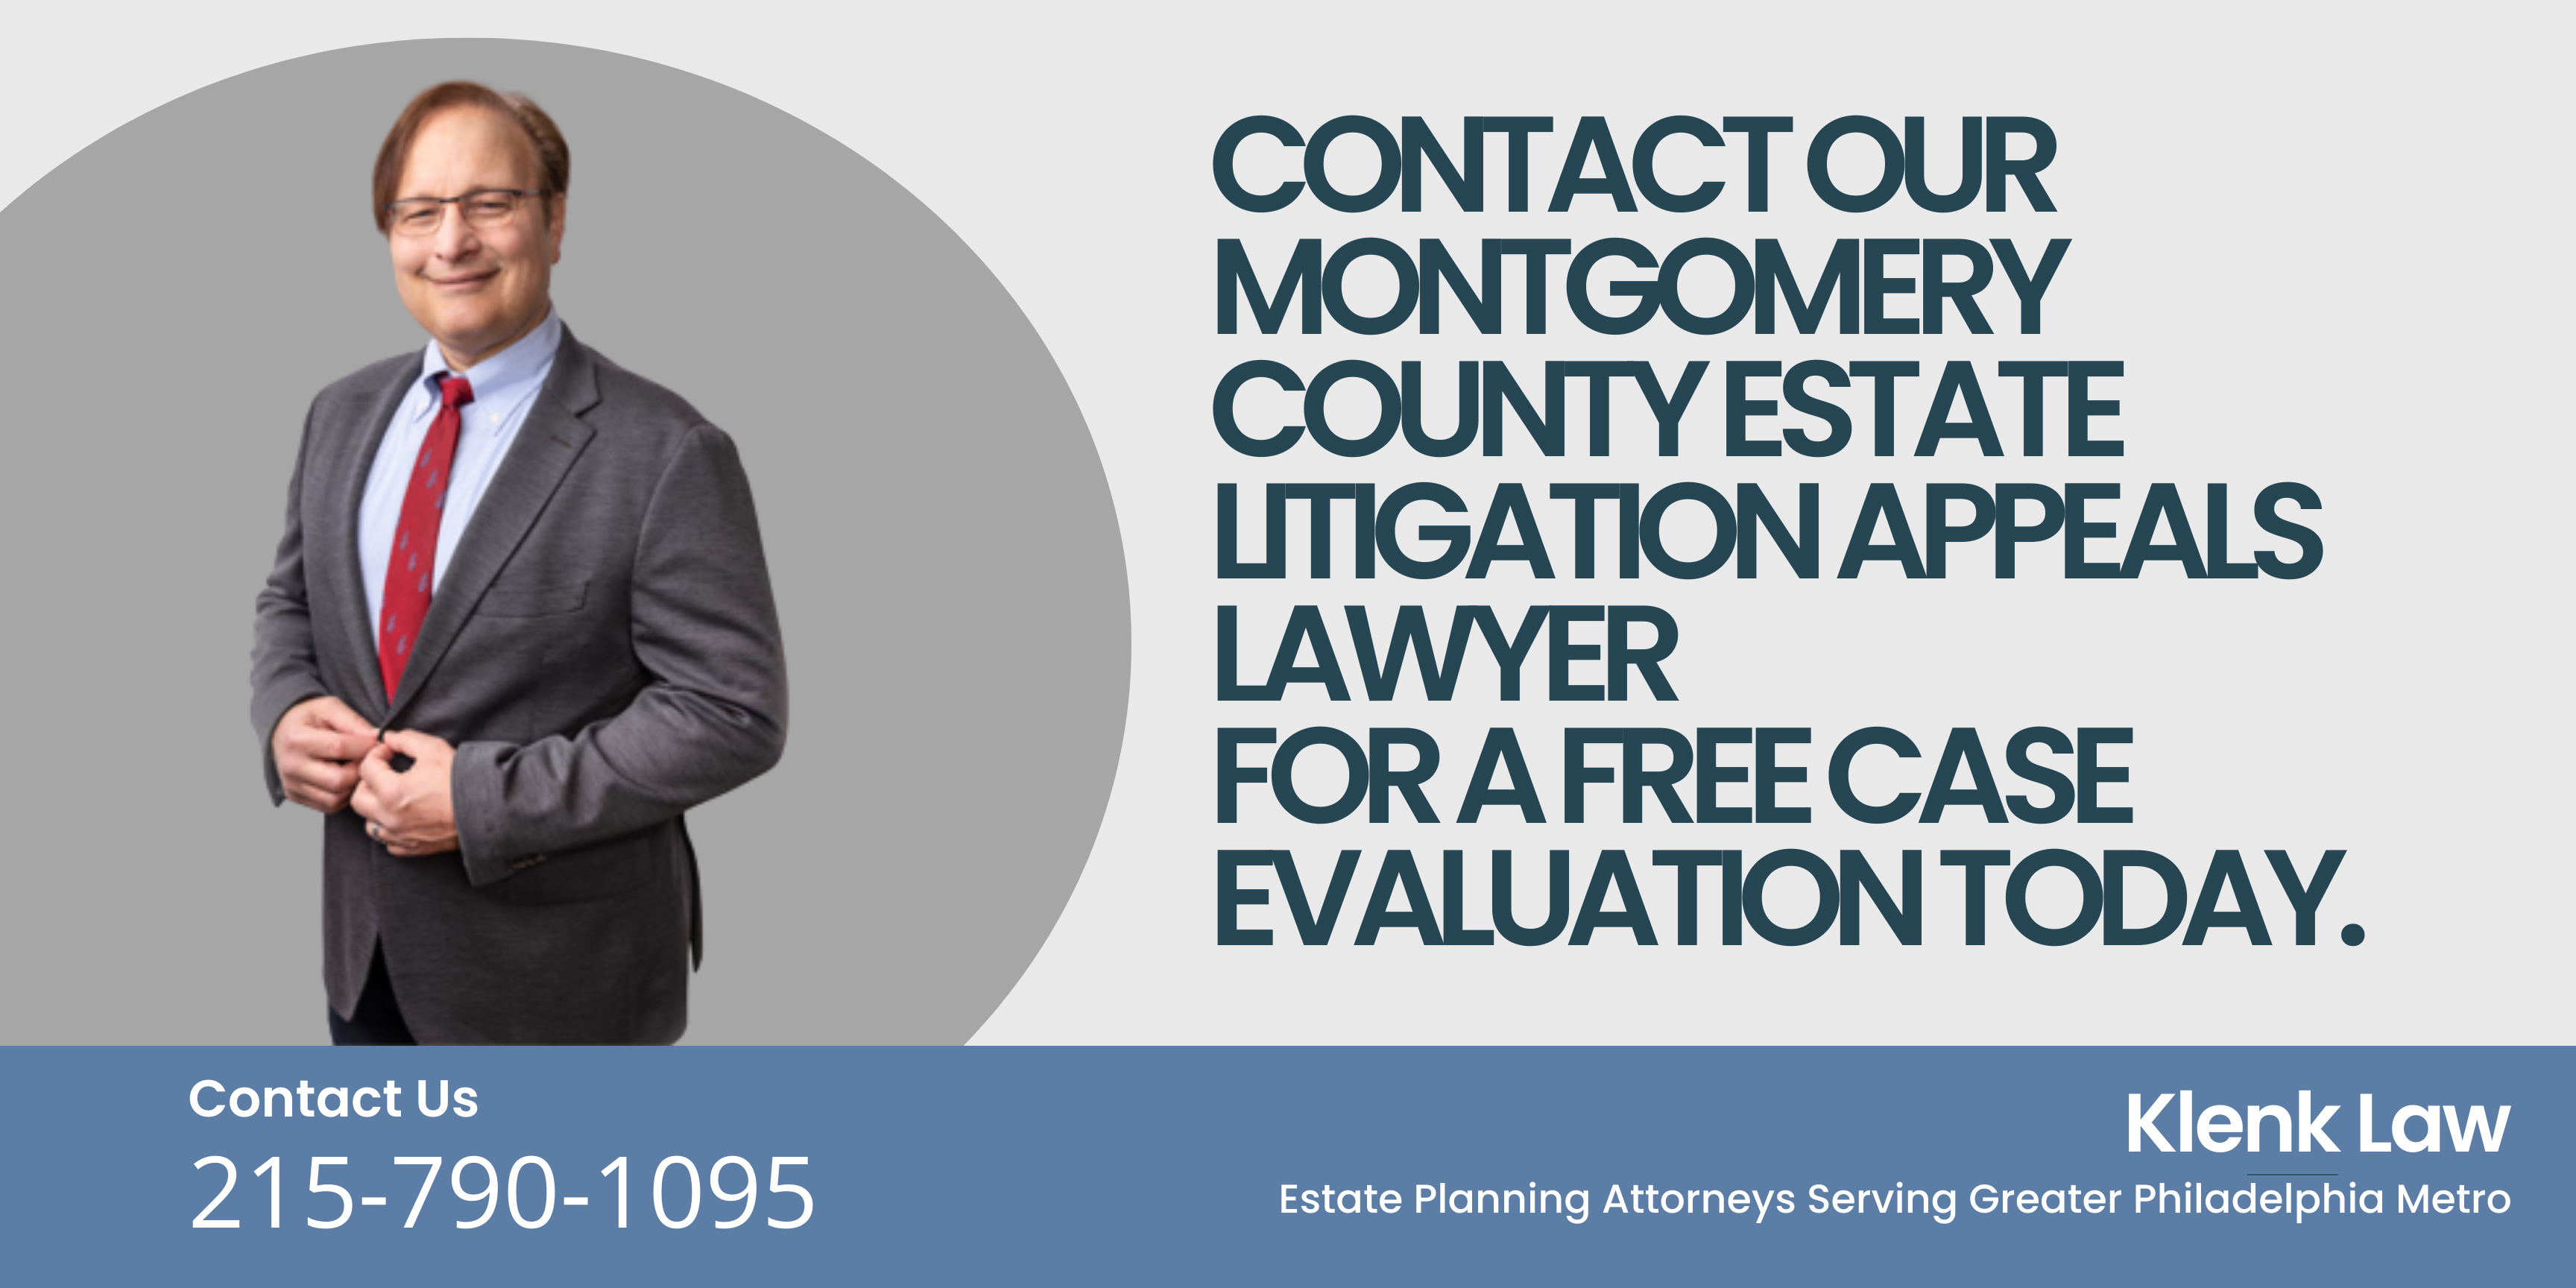 contact our Montgomery County Estate Litigation Appeals Lawyer